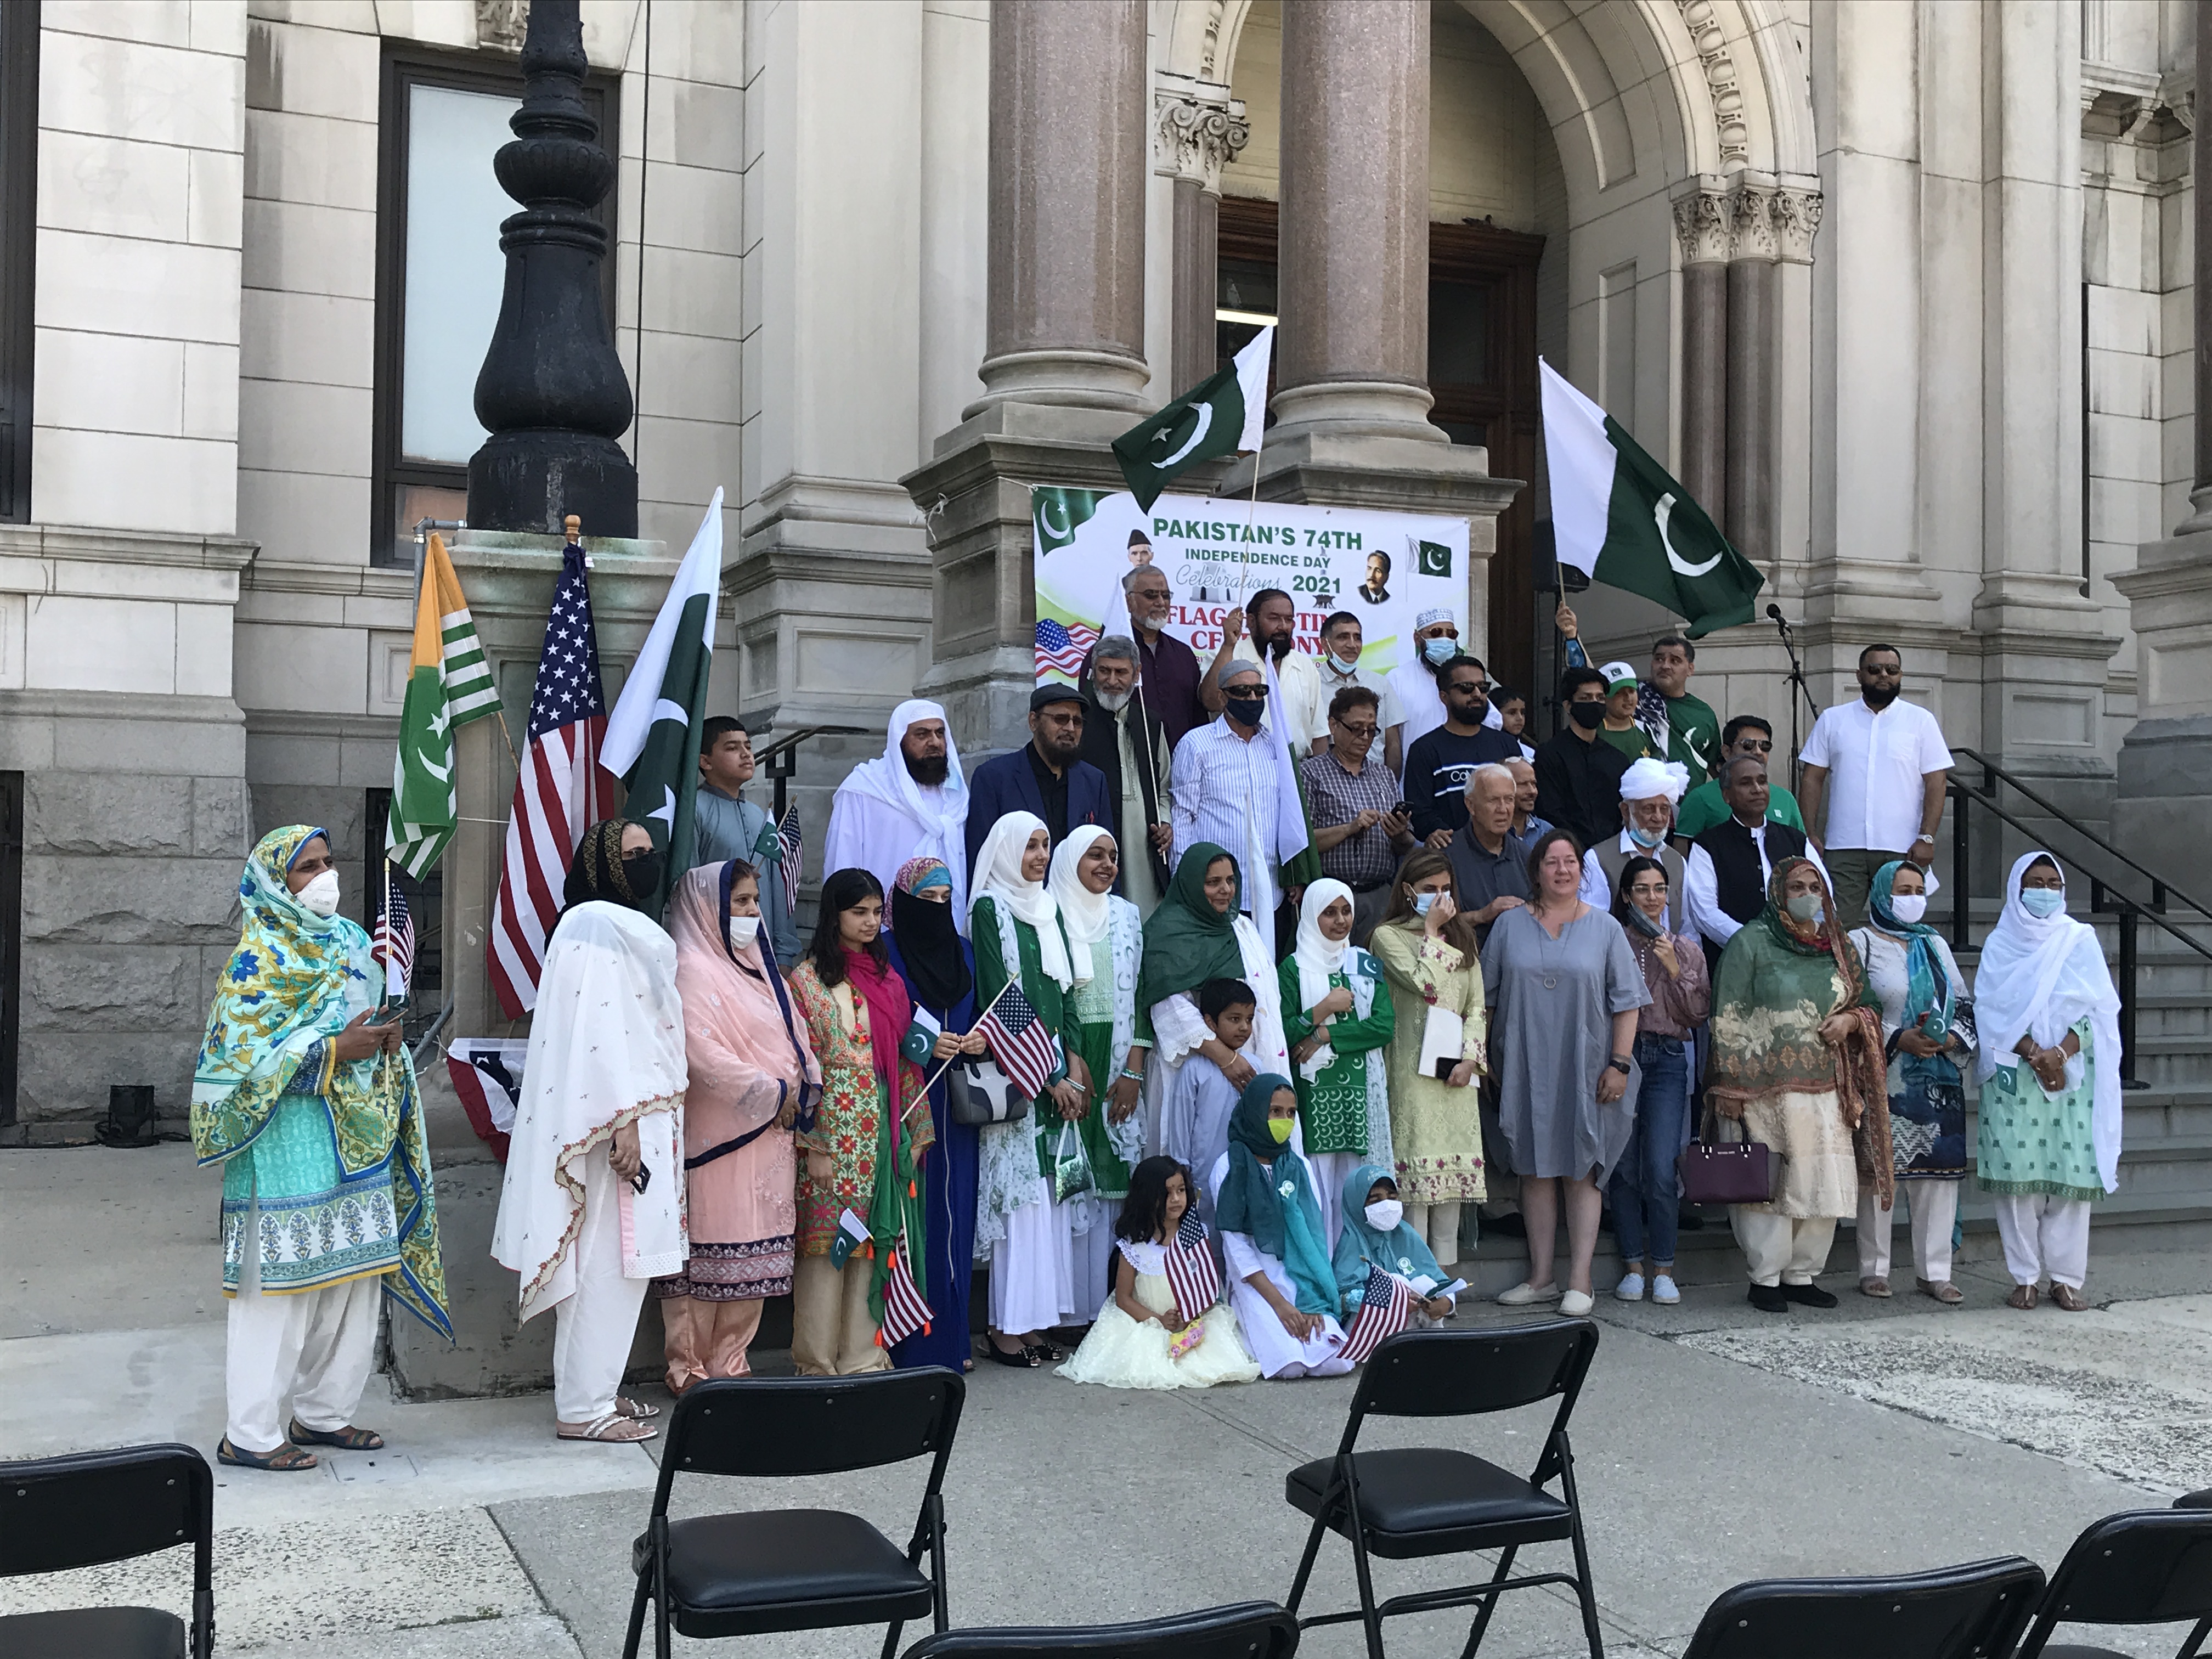 The flag raising ceremony of Pakistan. Many Pakistani Americans are standing together for a group photo. Some of them are wearing green and white clothes, and are holding green and white Pakistani flags. Jersey City City Hall, Jersey City, New Jersey, United States of America